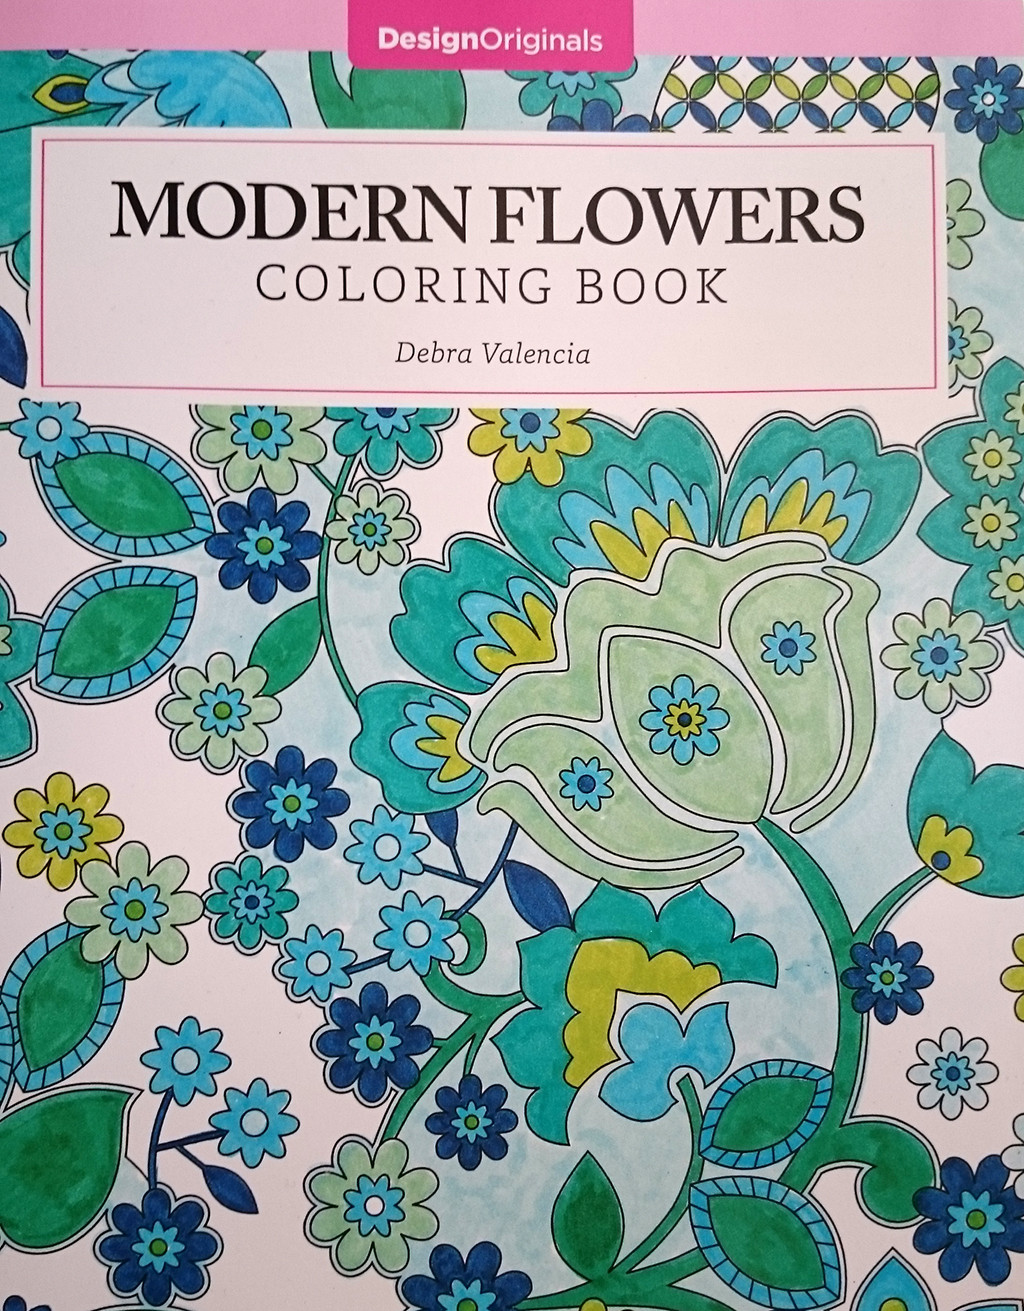 Modern Romance Coloring Book
 Coloring Books for Adults Series by Debra Valencia